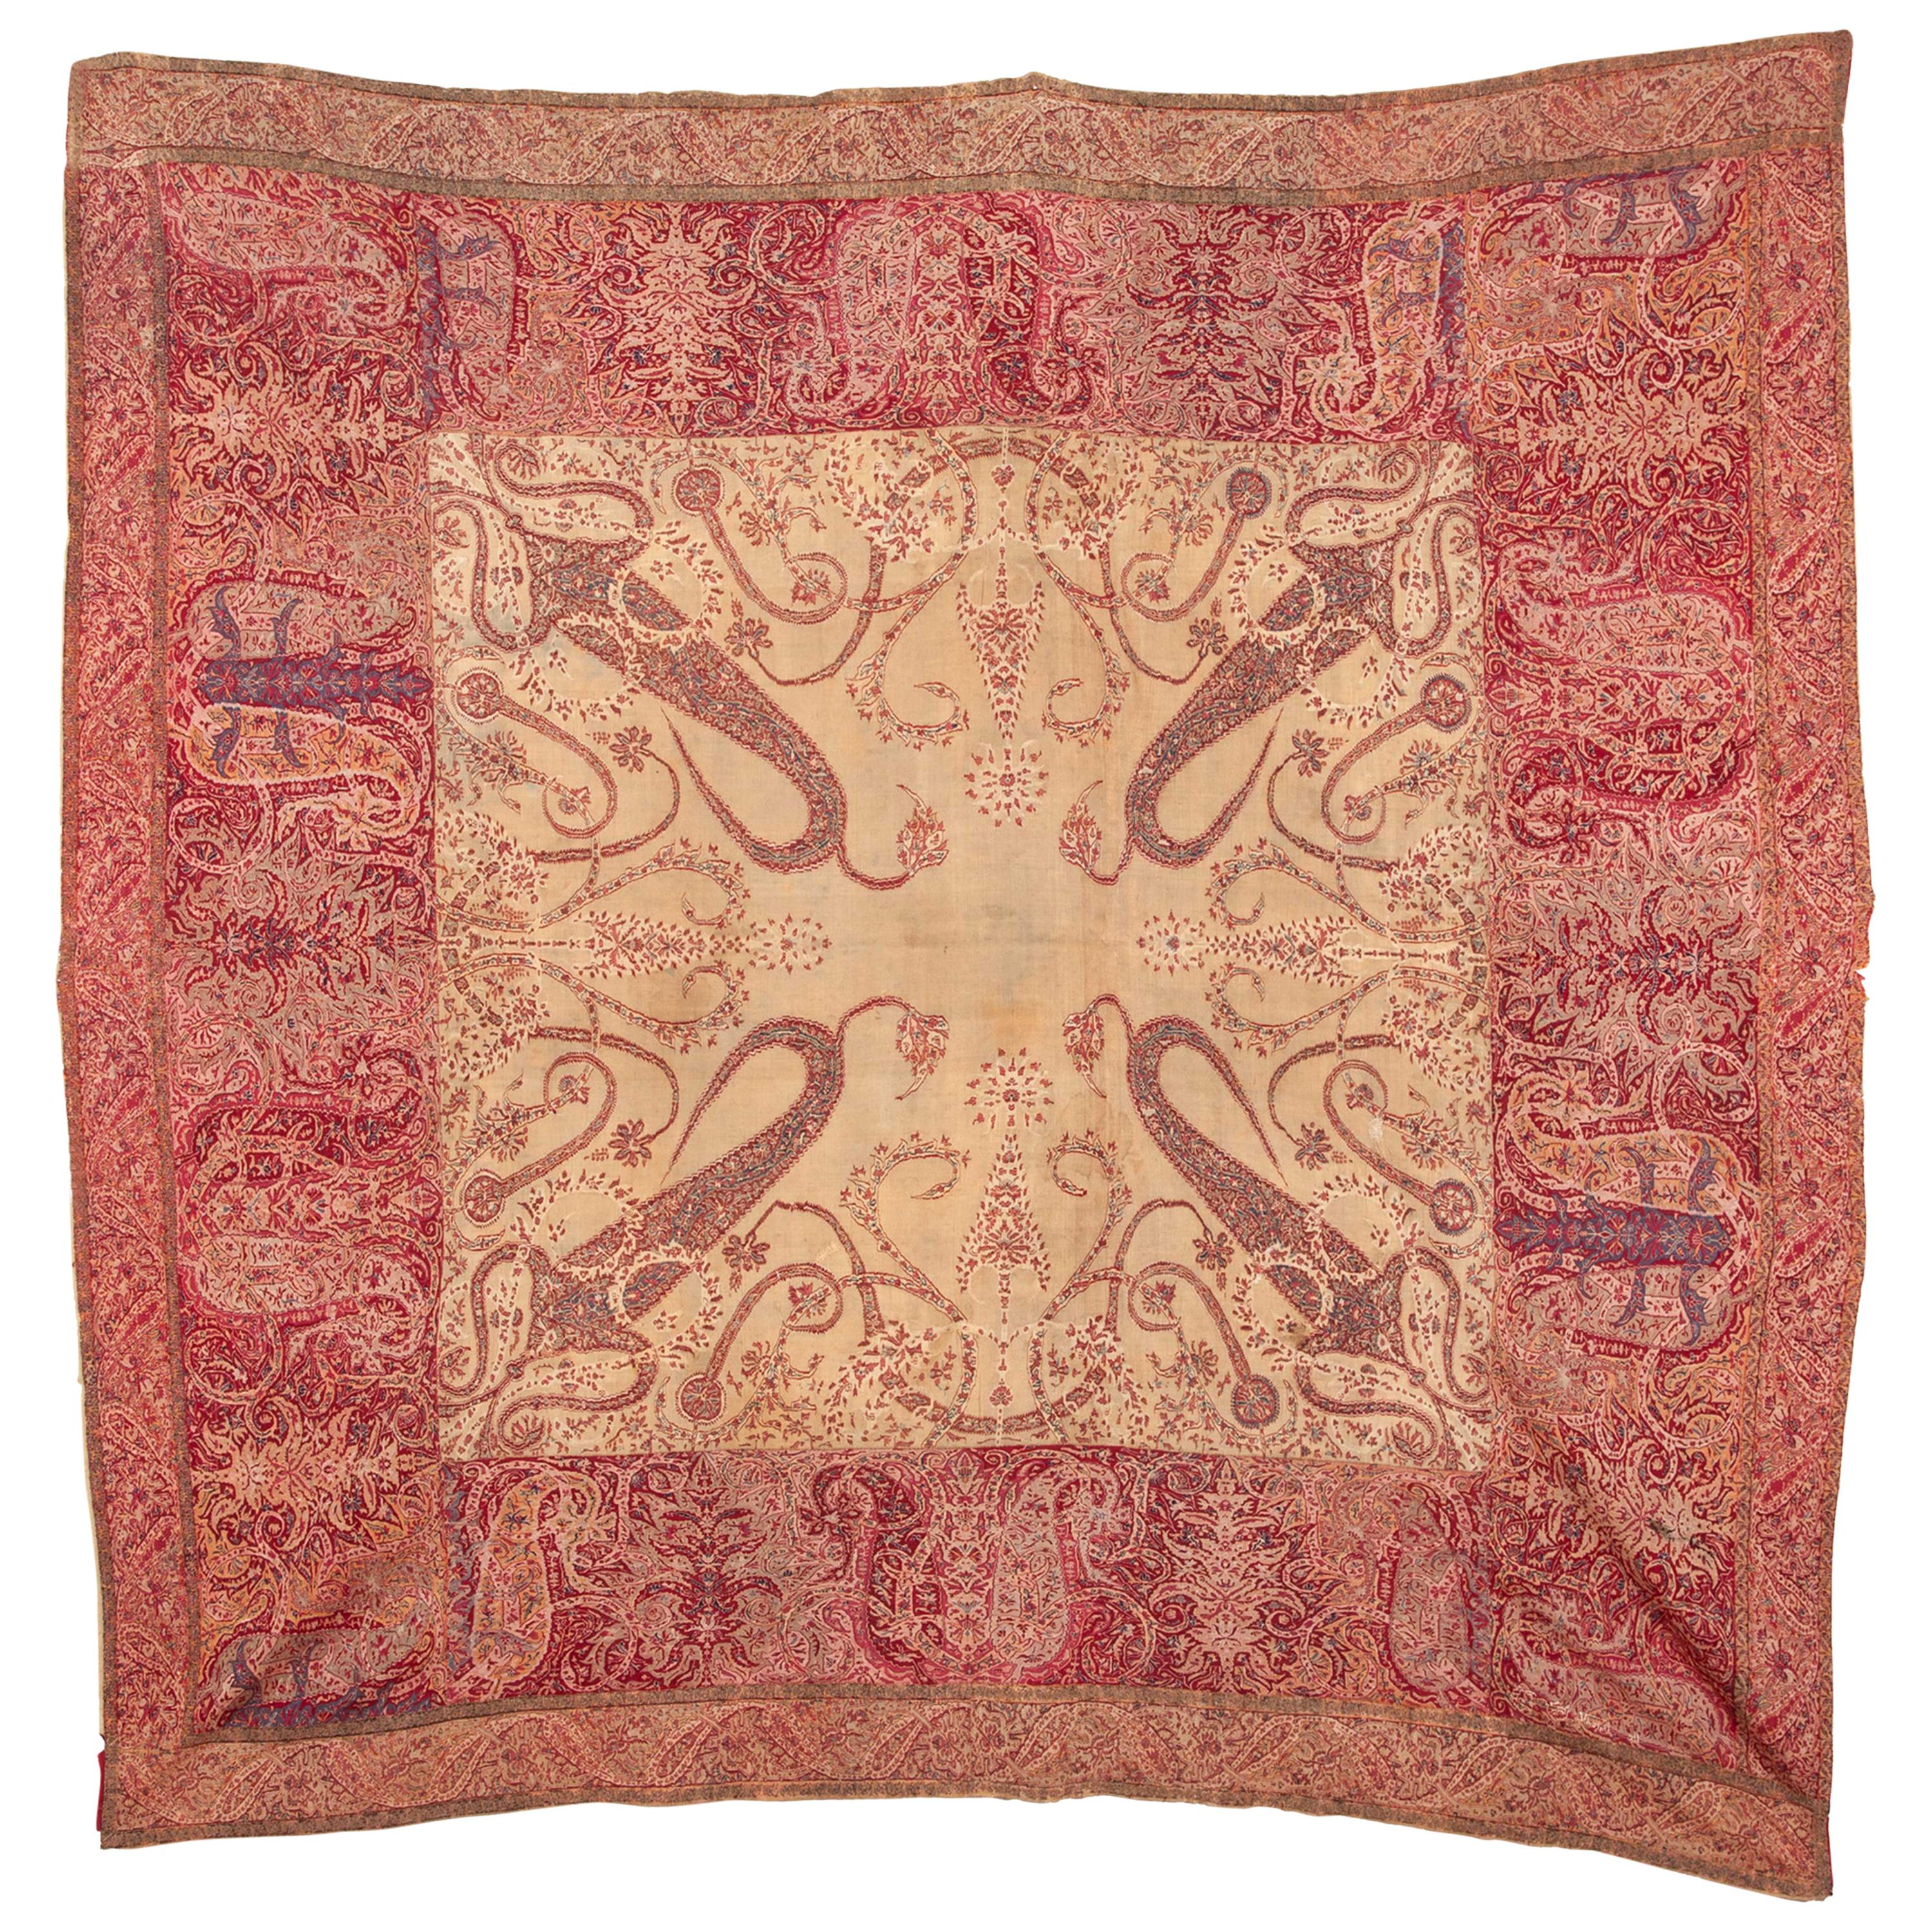 Antique Kashmir Shawl from India, 19th Century